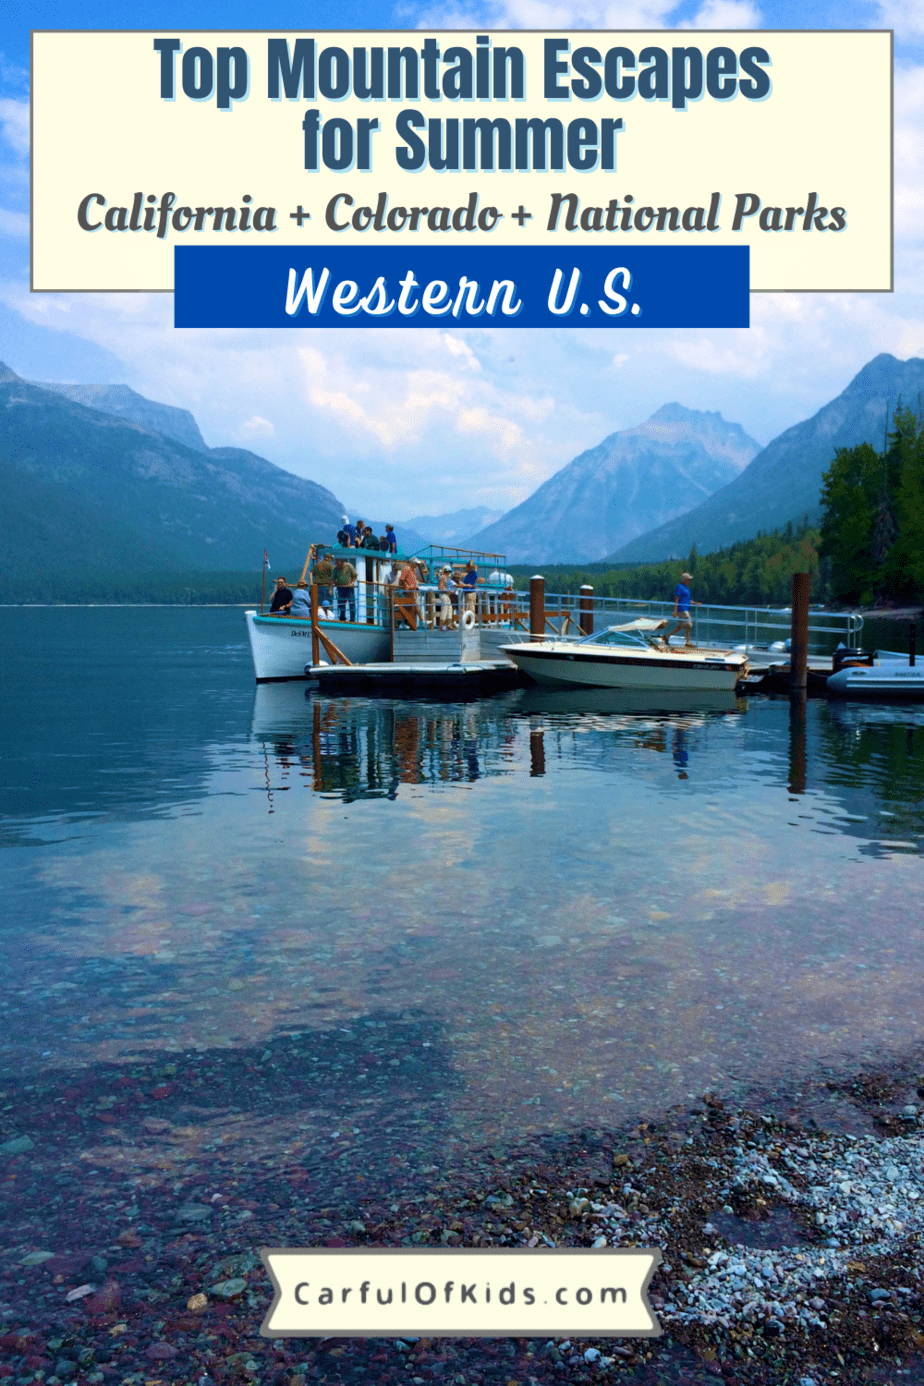 Plan an summer escape to the mountains of the western U.S. and find pristine lakes, evergreen covered mountains along with some surprises like glaciers and temperate rain forests. With activities like hiking, boat cruises and star gazing, enjoy a day or a week in a Western Mountain Destination. There's even a range of lodging choices from primiative camping to luxurious vacation homes to meet your levels of comfort. Best Montain Getaway for Families | Where to go to see Mountains | Best National Parks with Mountains #Mountains #FamilyTrips 